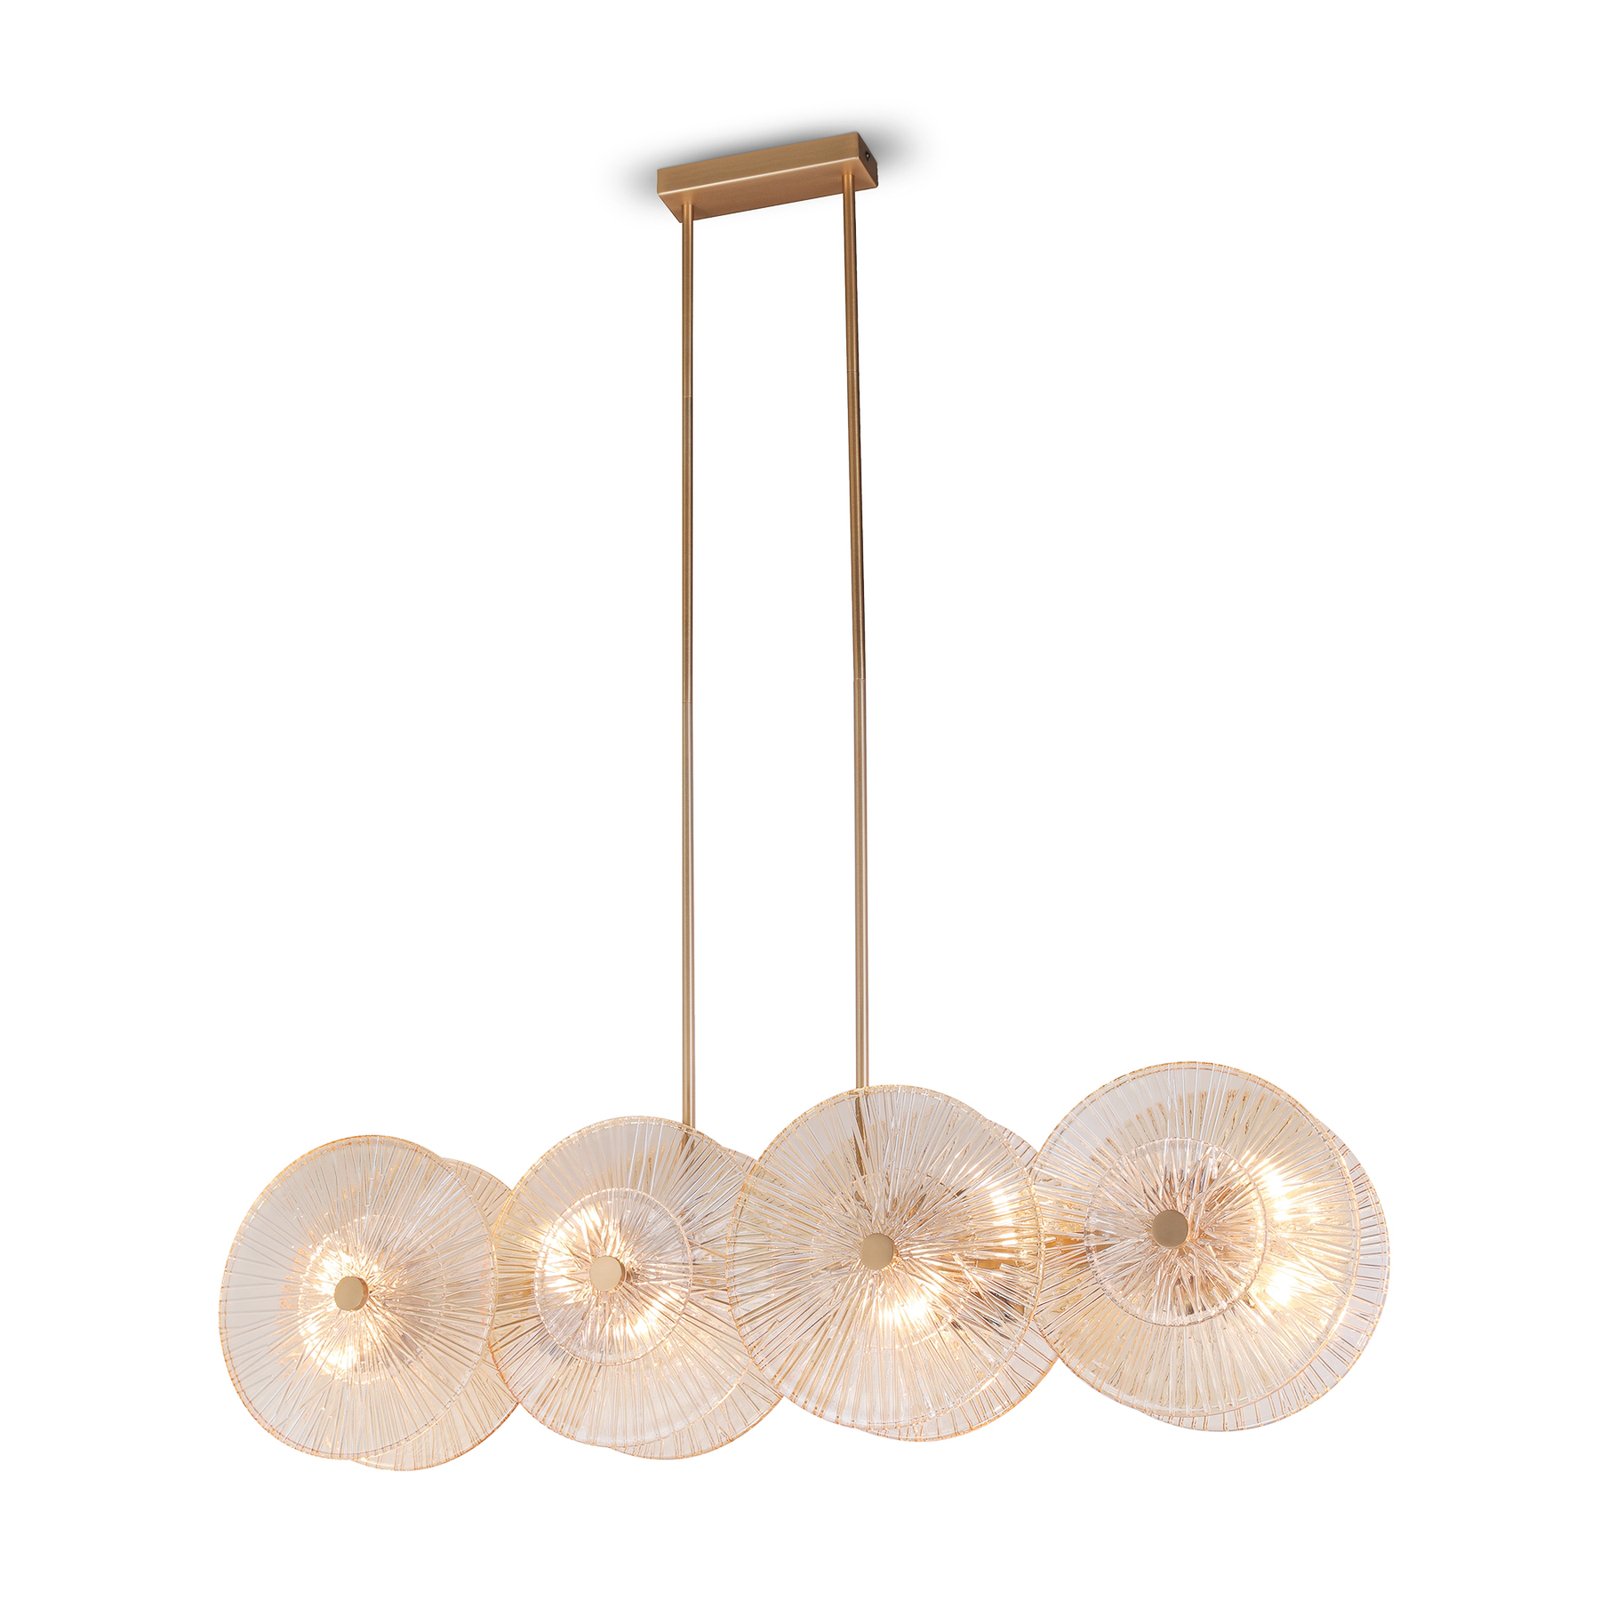 Maytoni Aster hanging light with a beam, 8-bulb